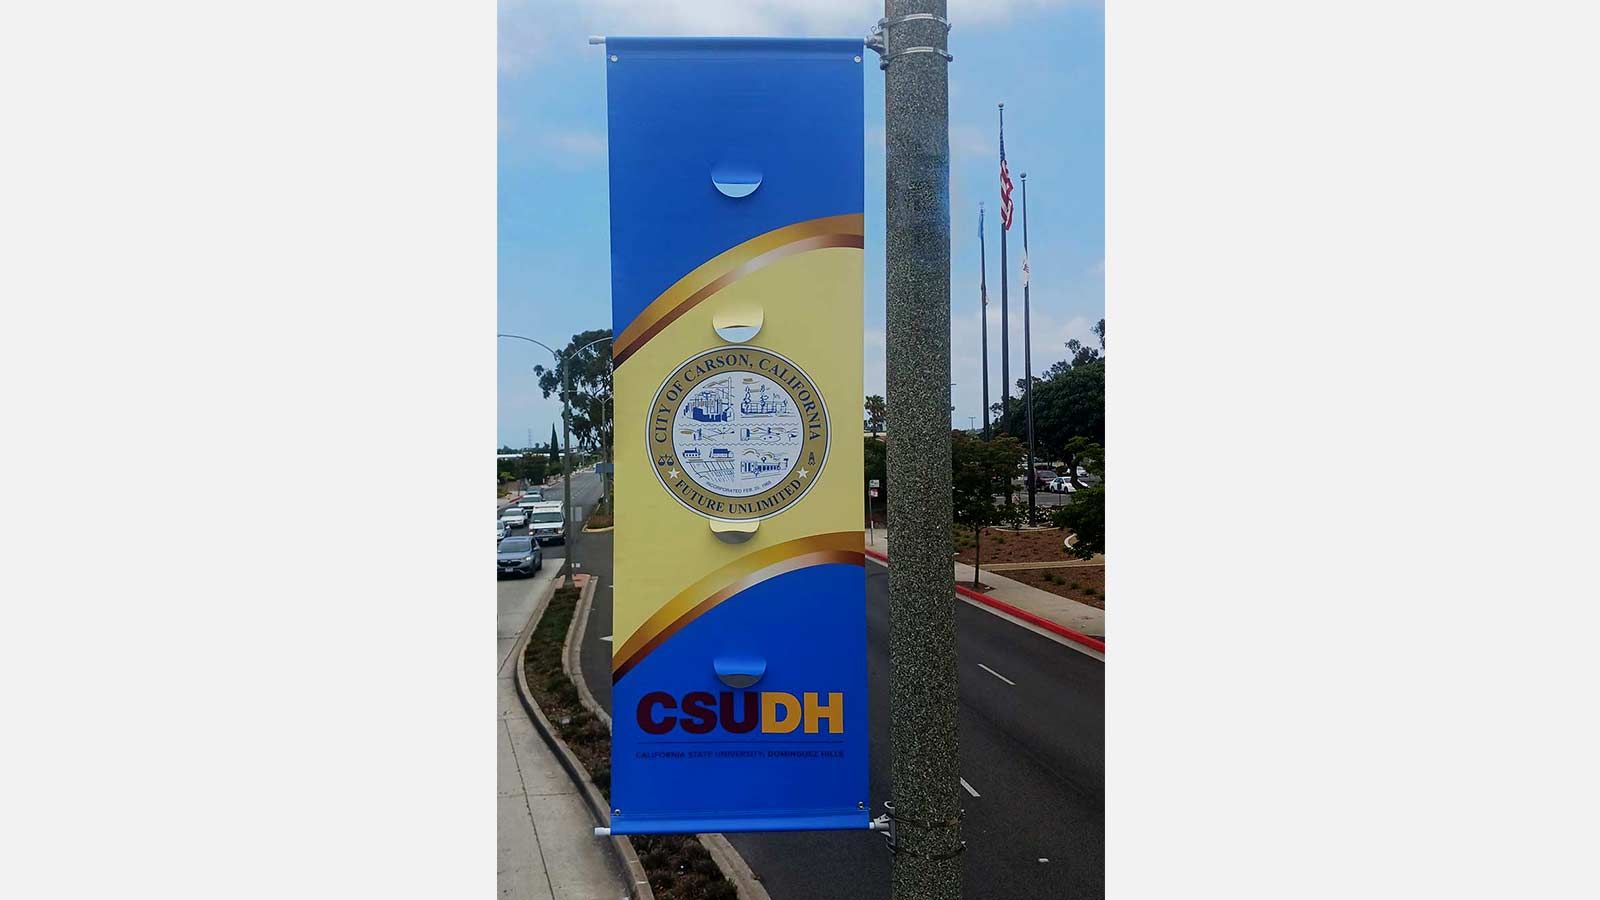 CSUDH outdoor sign installed by the road